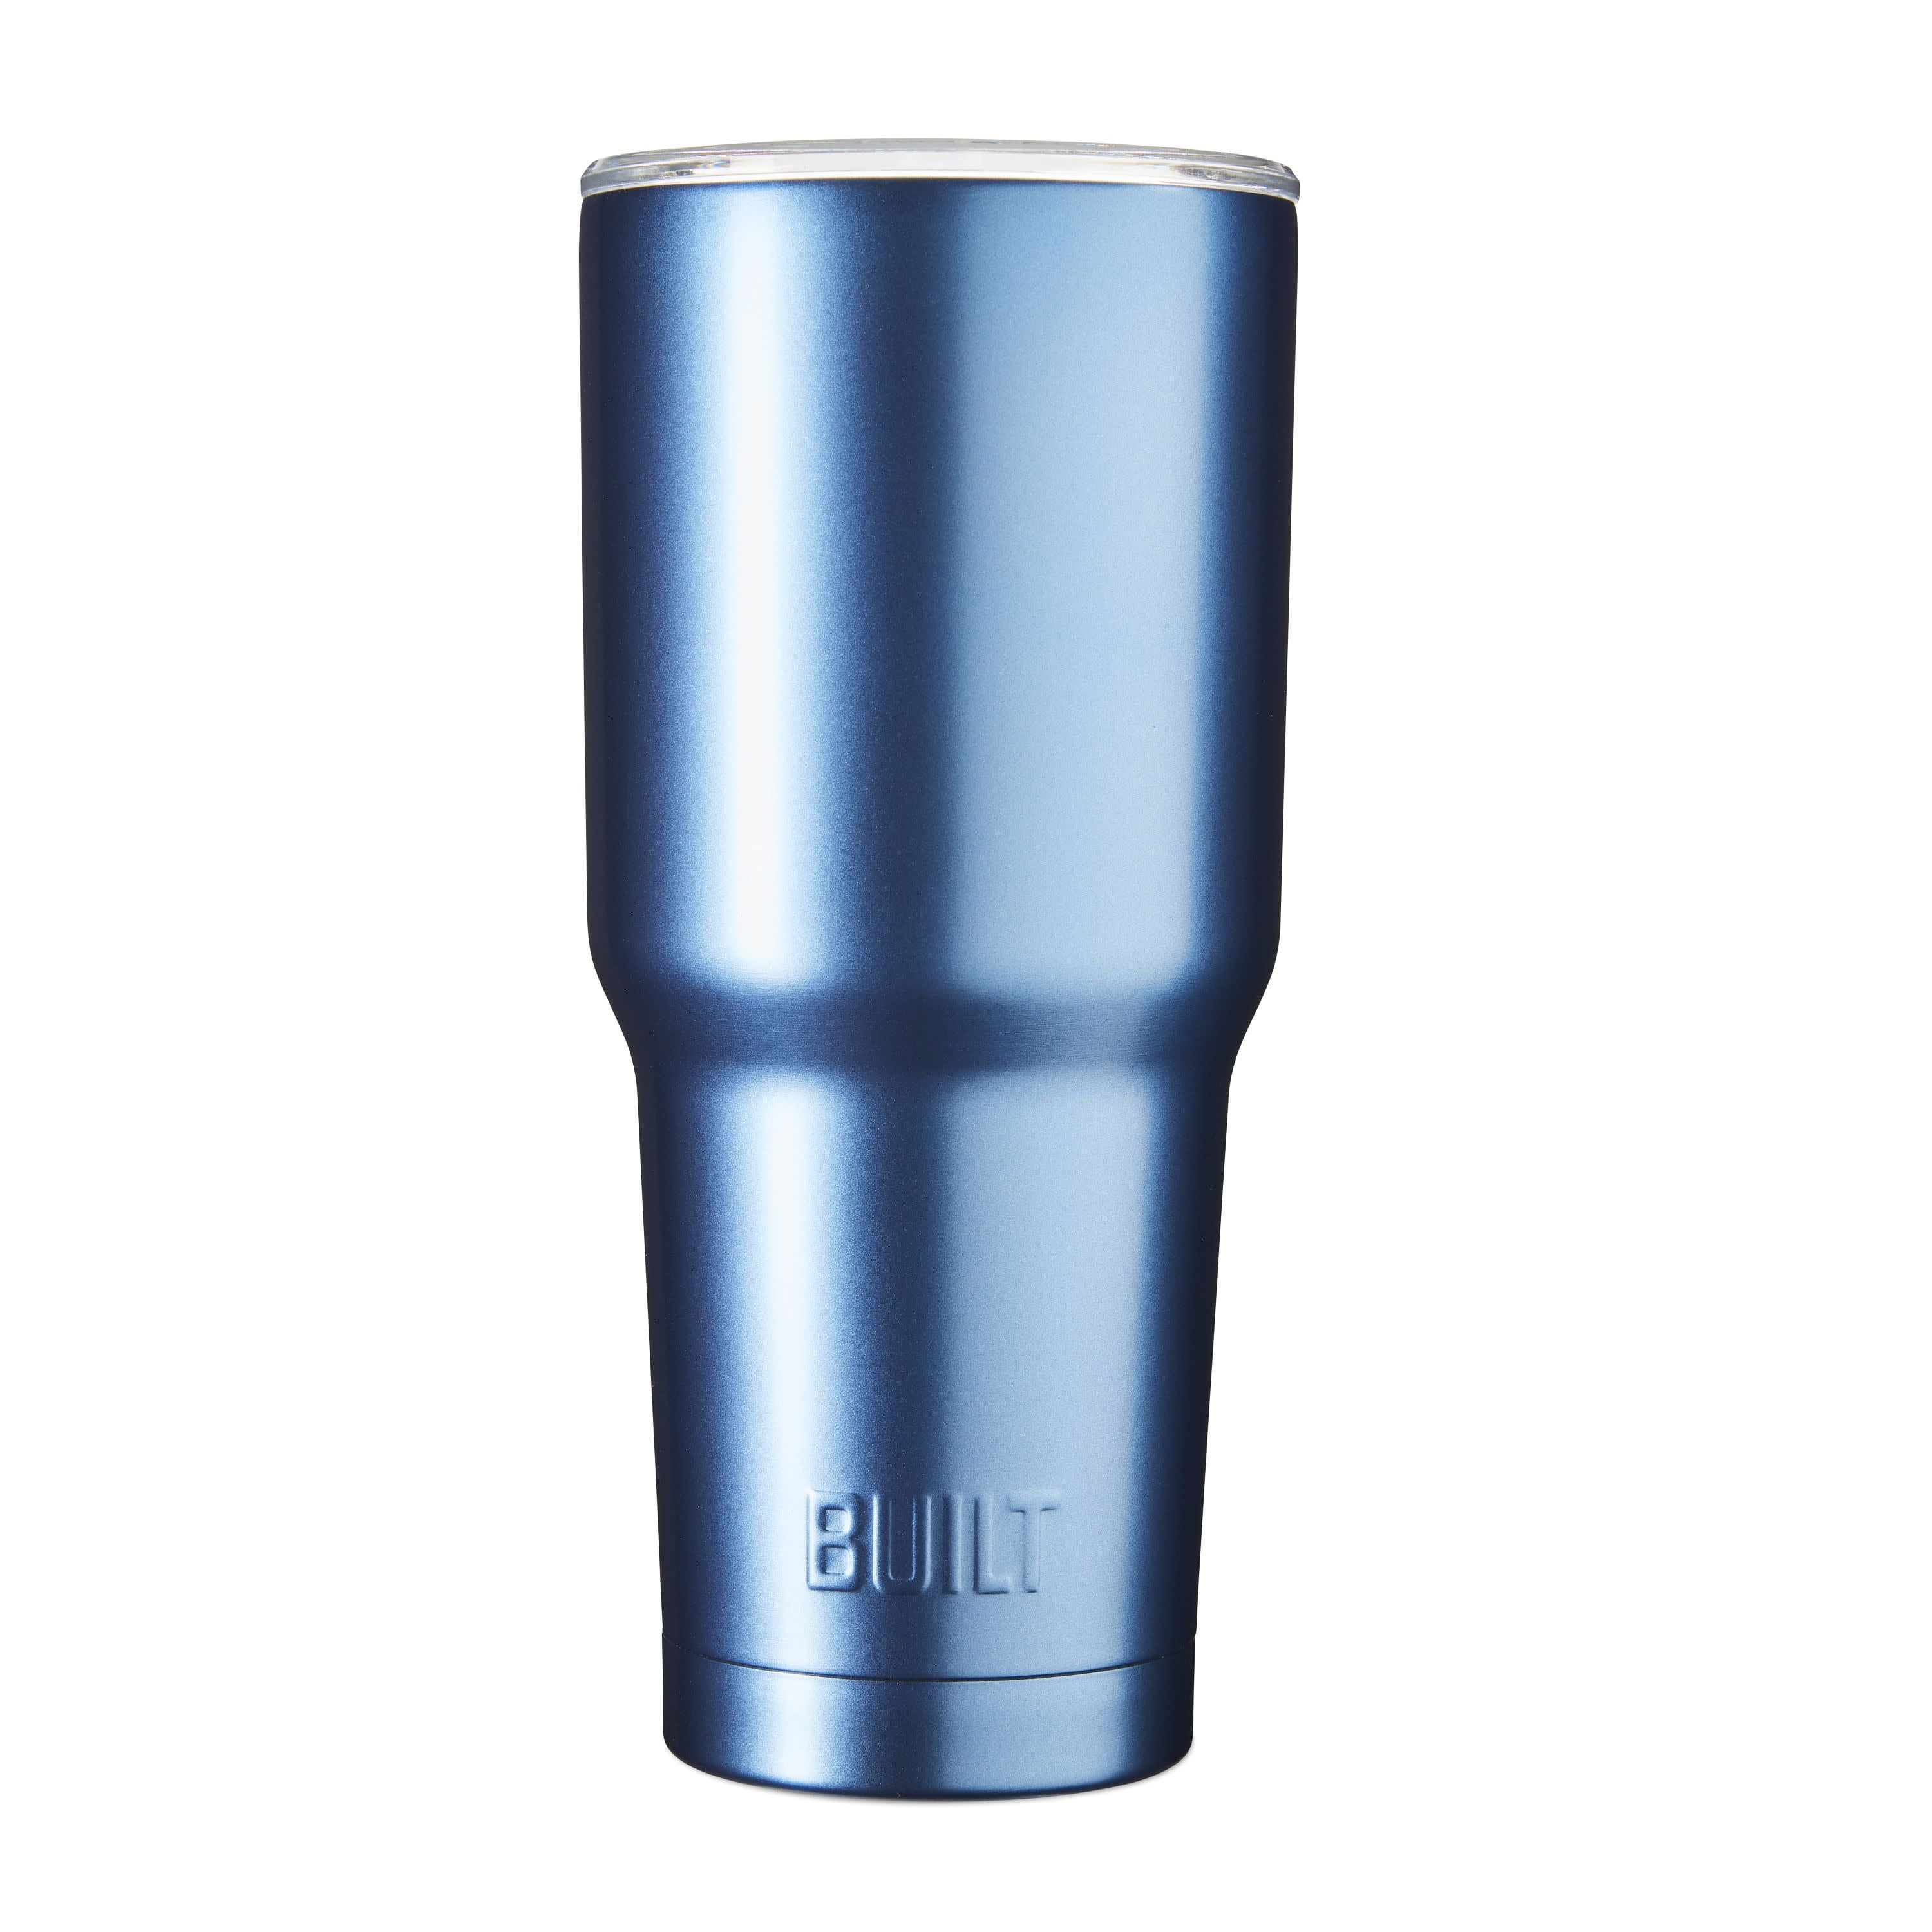 Crunch time 530 ml 18 oz stainless steel tumbler